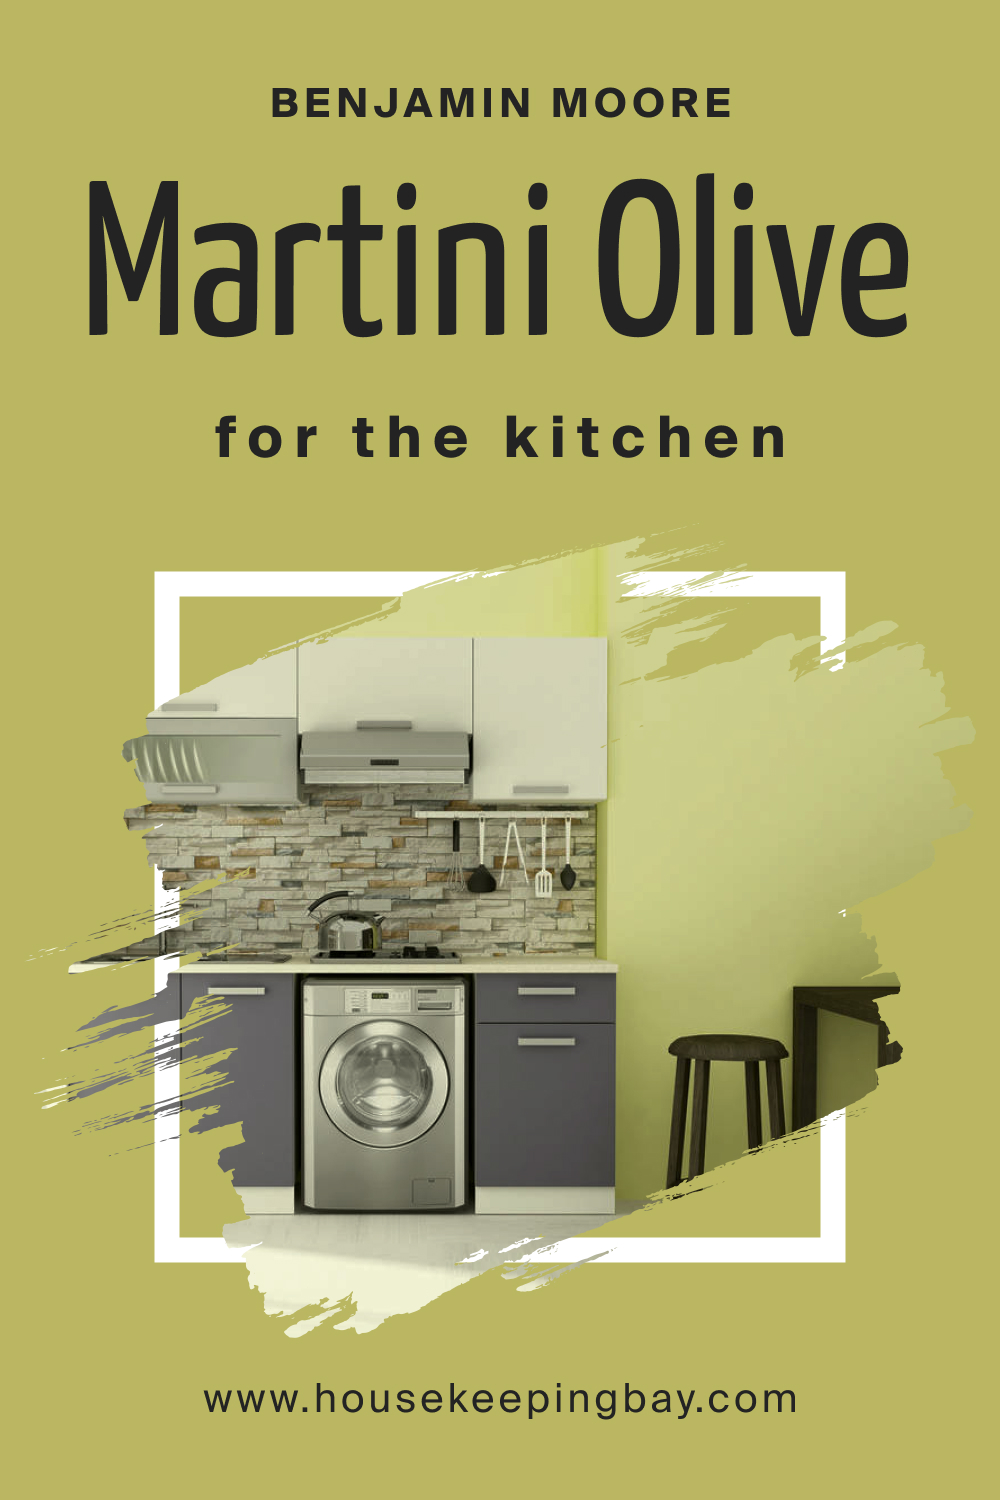 How to Use Martini Olive CSP-890 in the Kitchen?